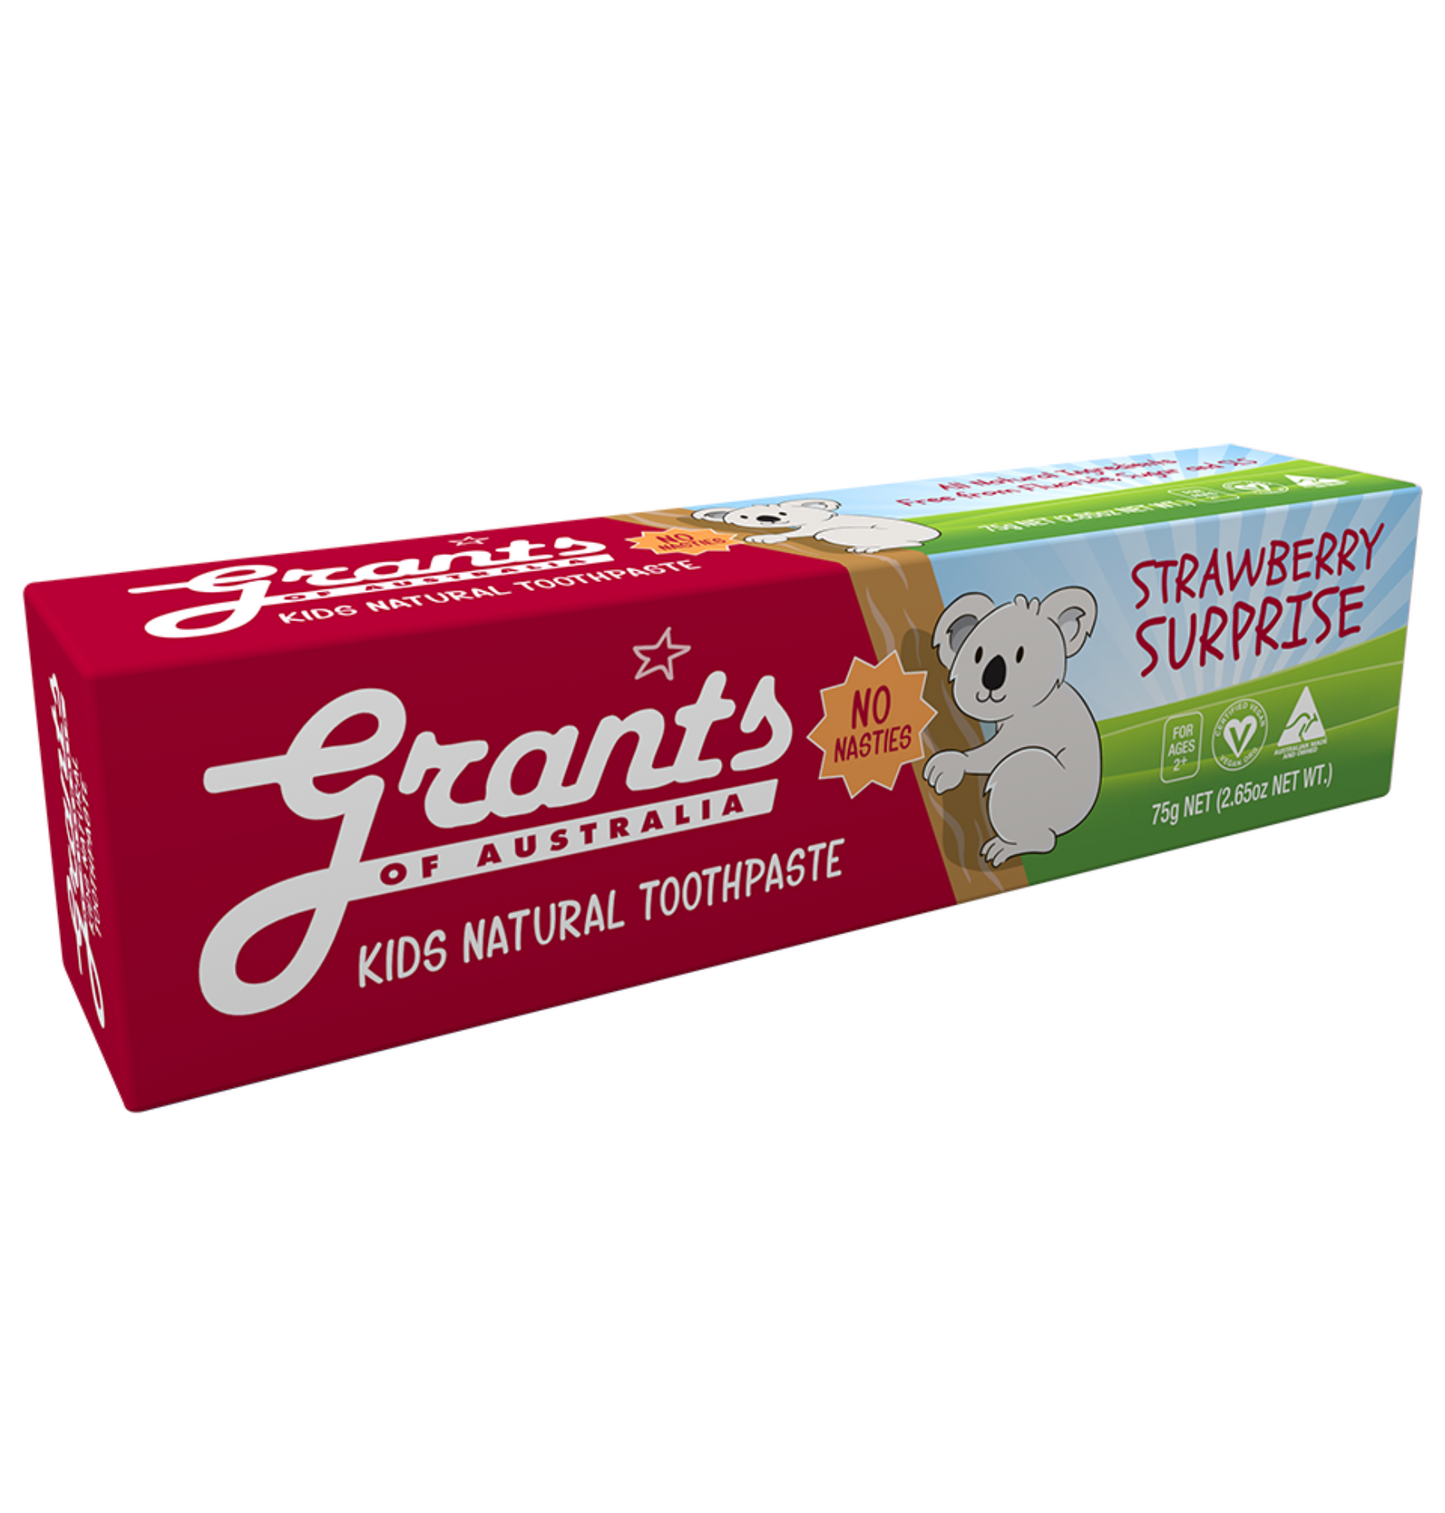 Grants Natural Toothpaste Kids 75g, Strawberry Surprise Flavour